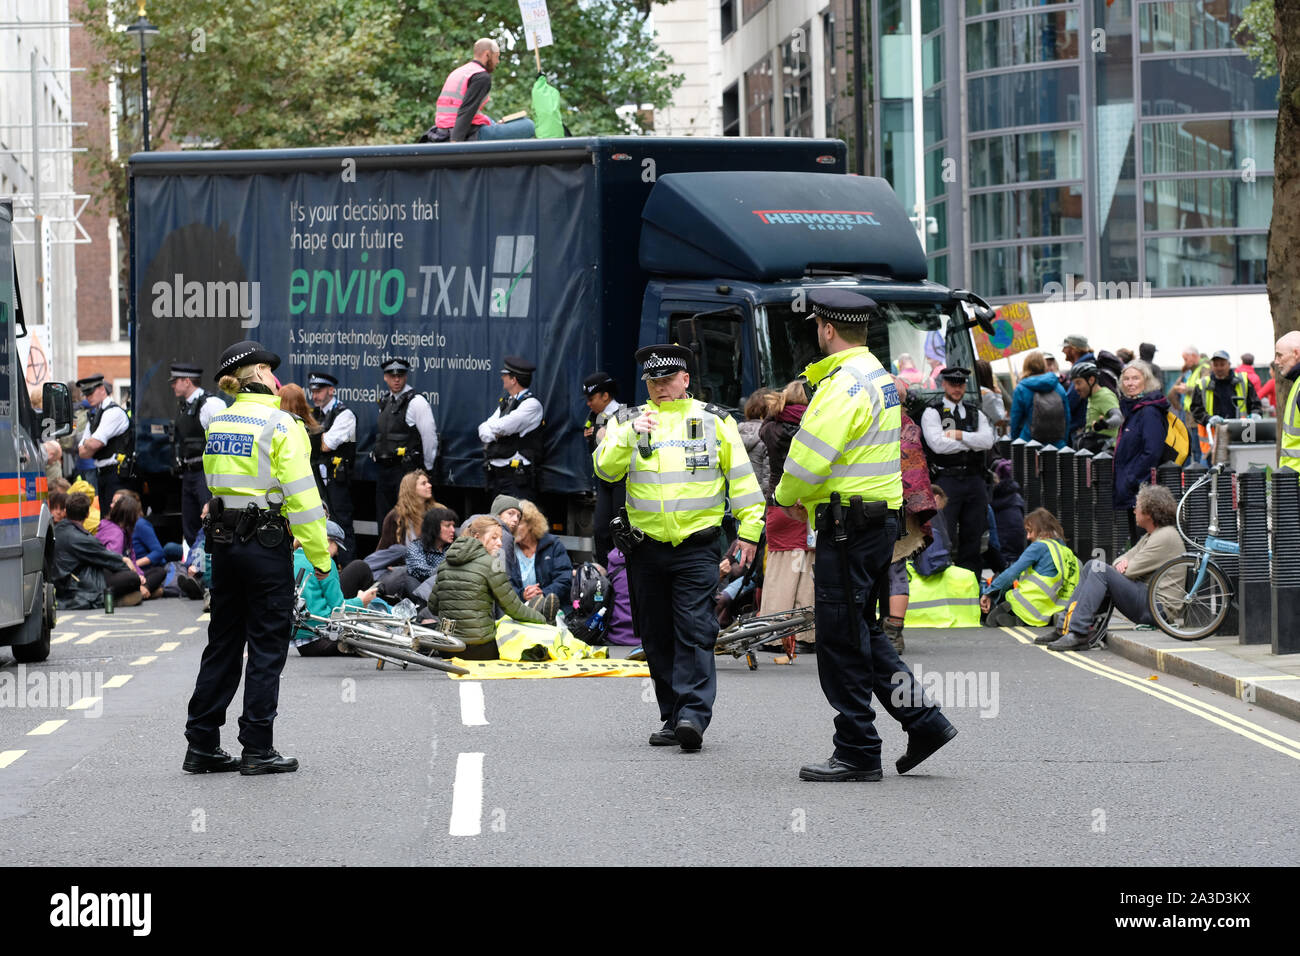 Westminster, London, UK - Monday 7th October 2019 - Police officers confer in front of the Extinction Rebellion XR climate protesters who have blocked block Marsham Street directly outisde the Home Office with a lorry. Photo Steven May / Alamy Live News Stock Photo